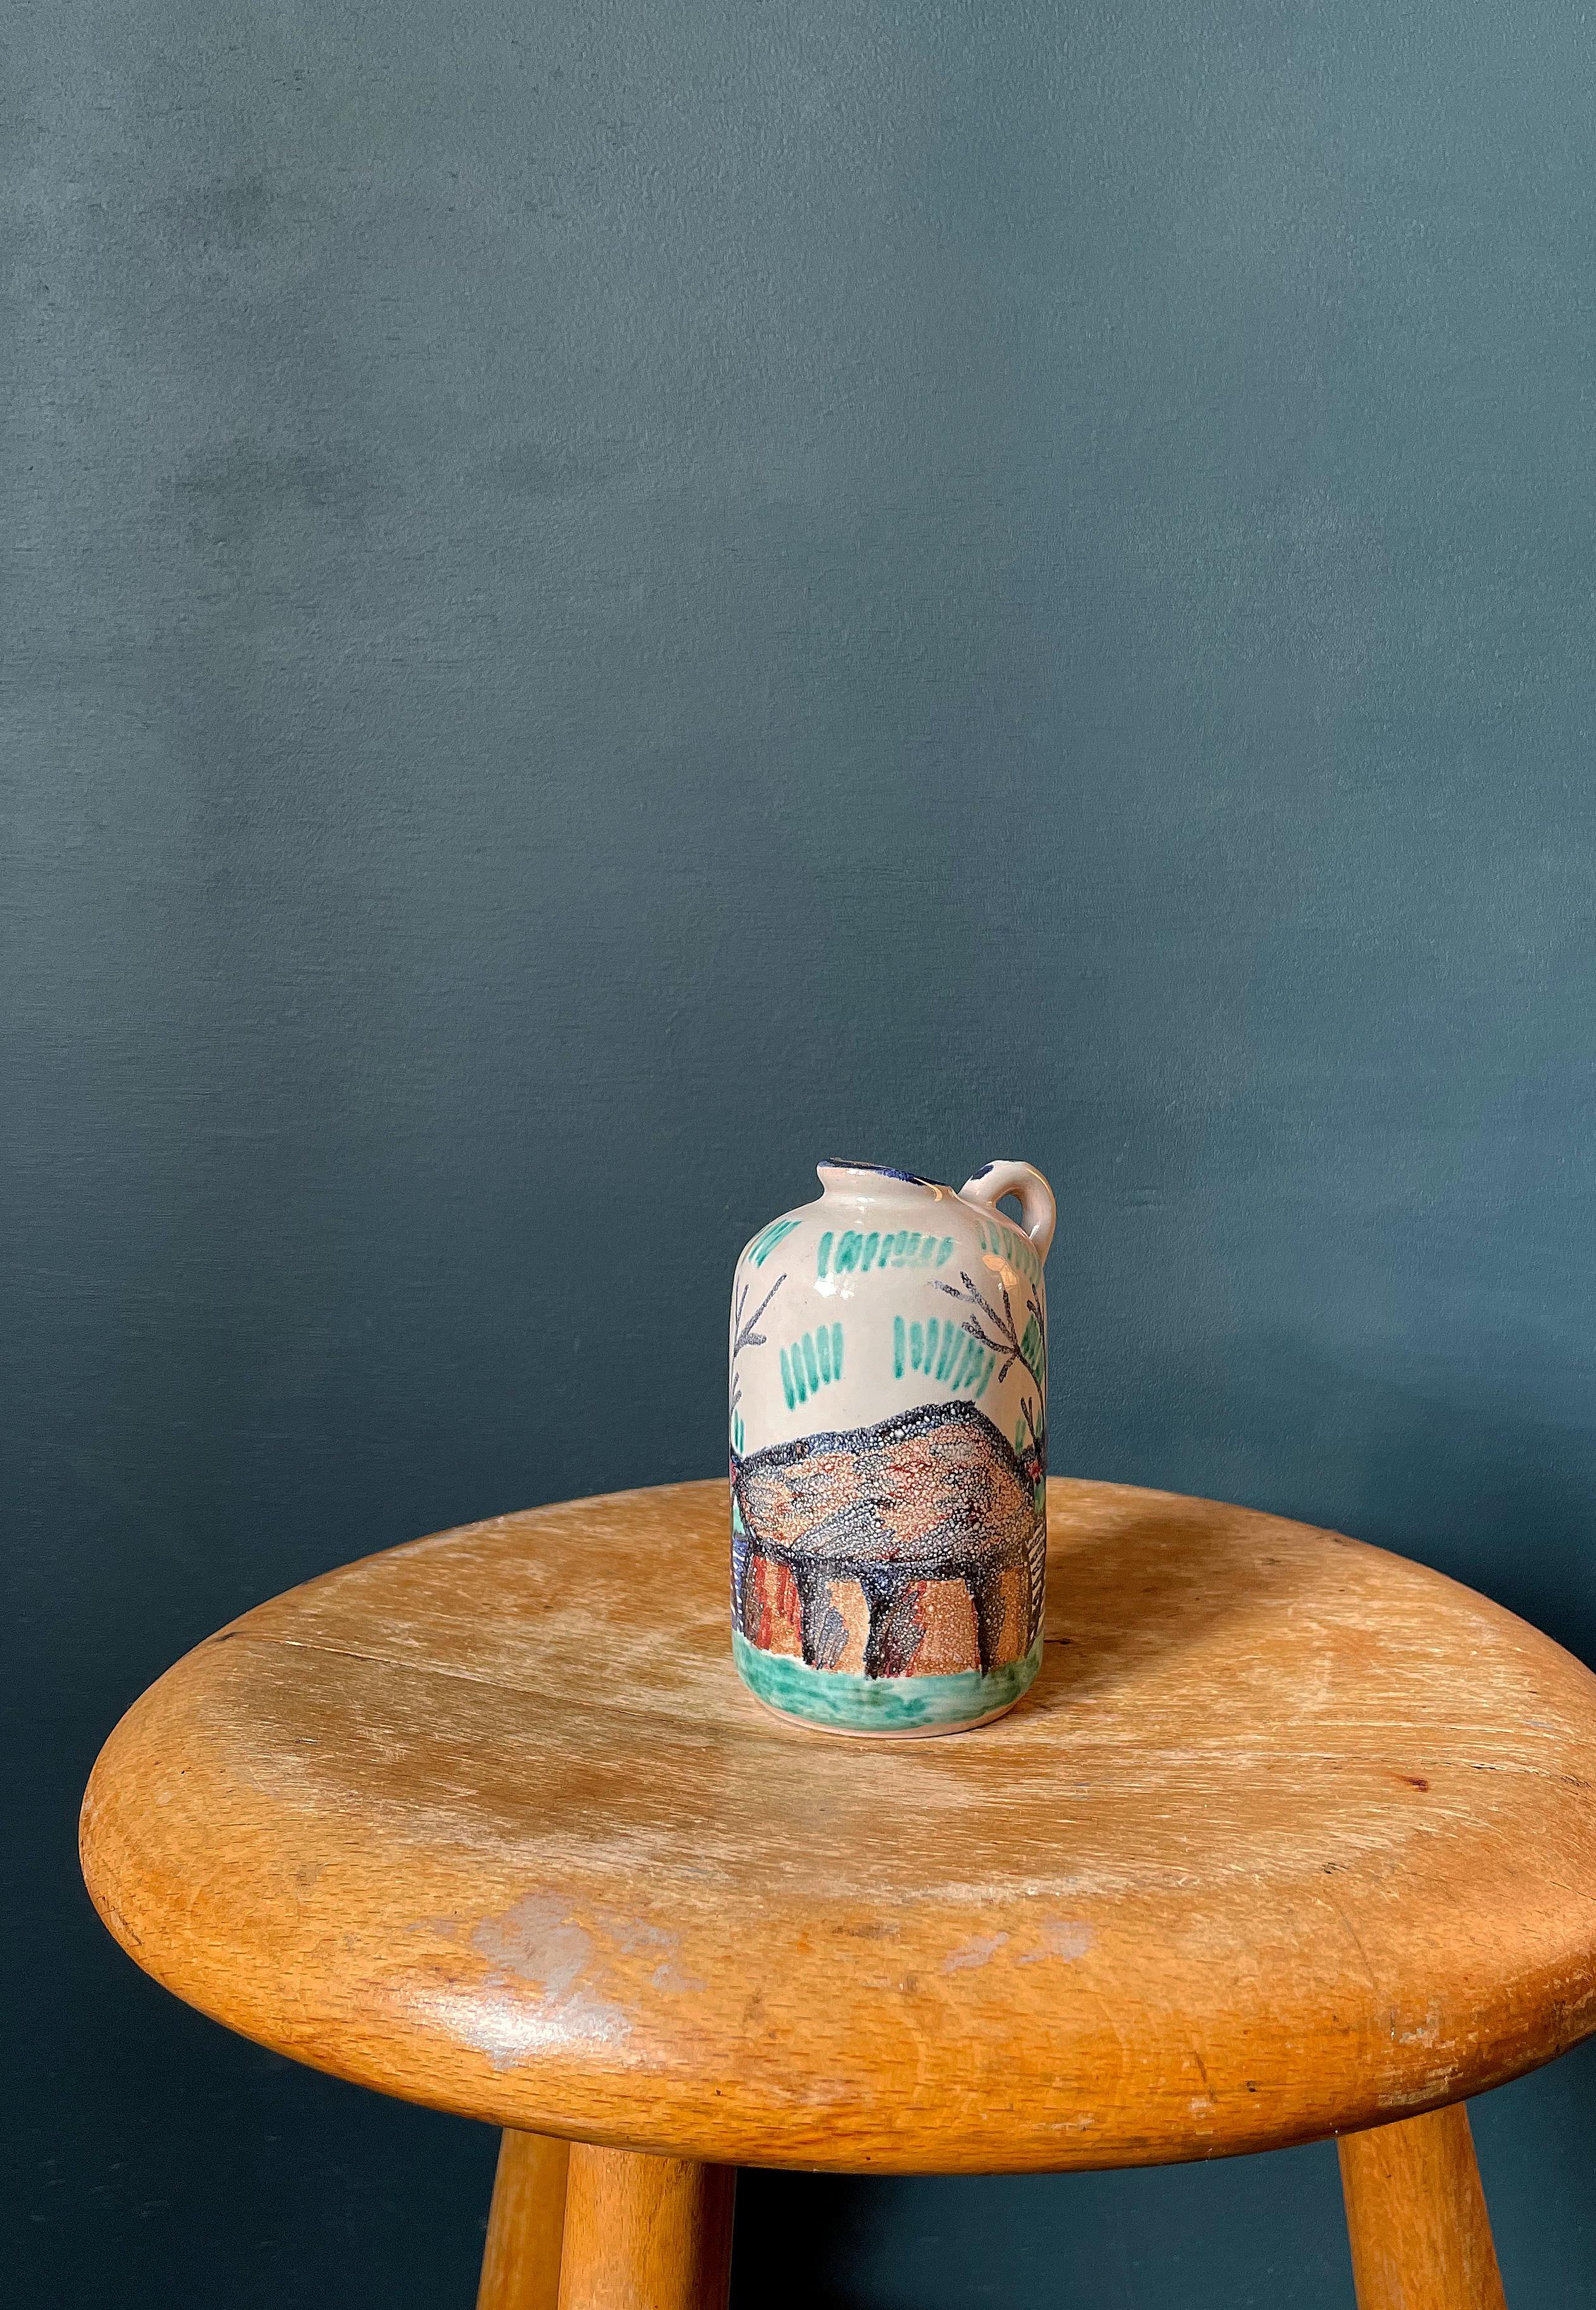 Small midcentury handpainted ceramic pitcher vase. Decorated with landscape motif of a Danish stone age viking grave built of large rocks. Multicolored unique decor on chalk white background. Blue glaze on spout, and small handle with blue dots.